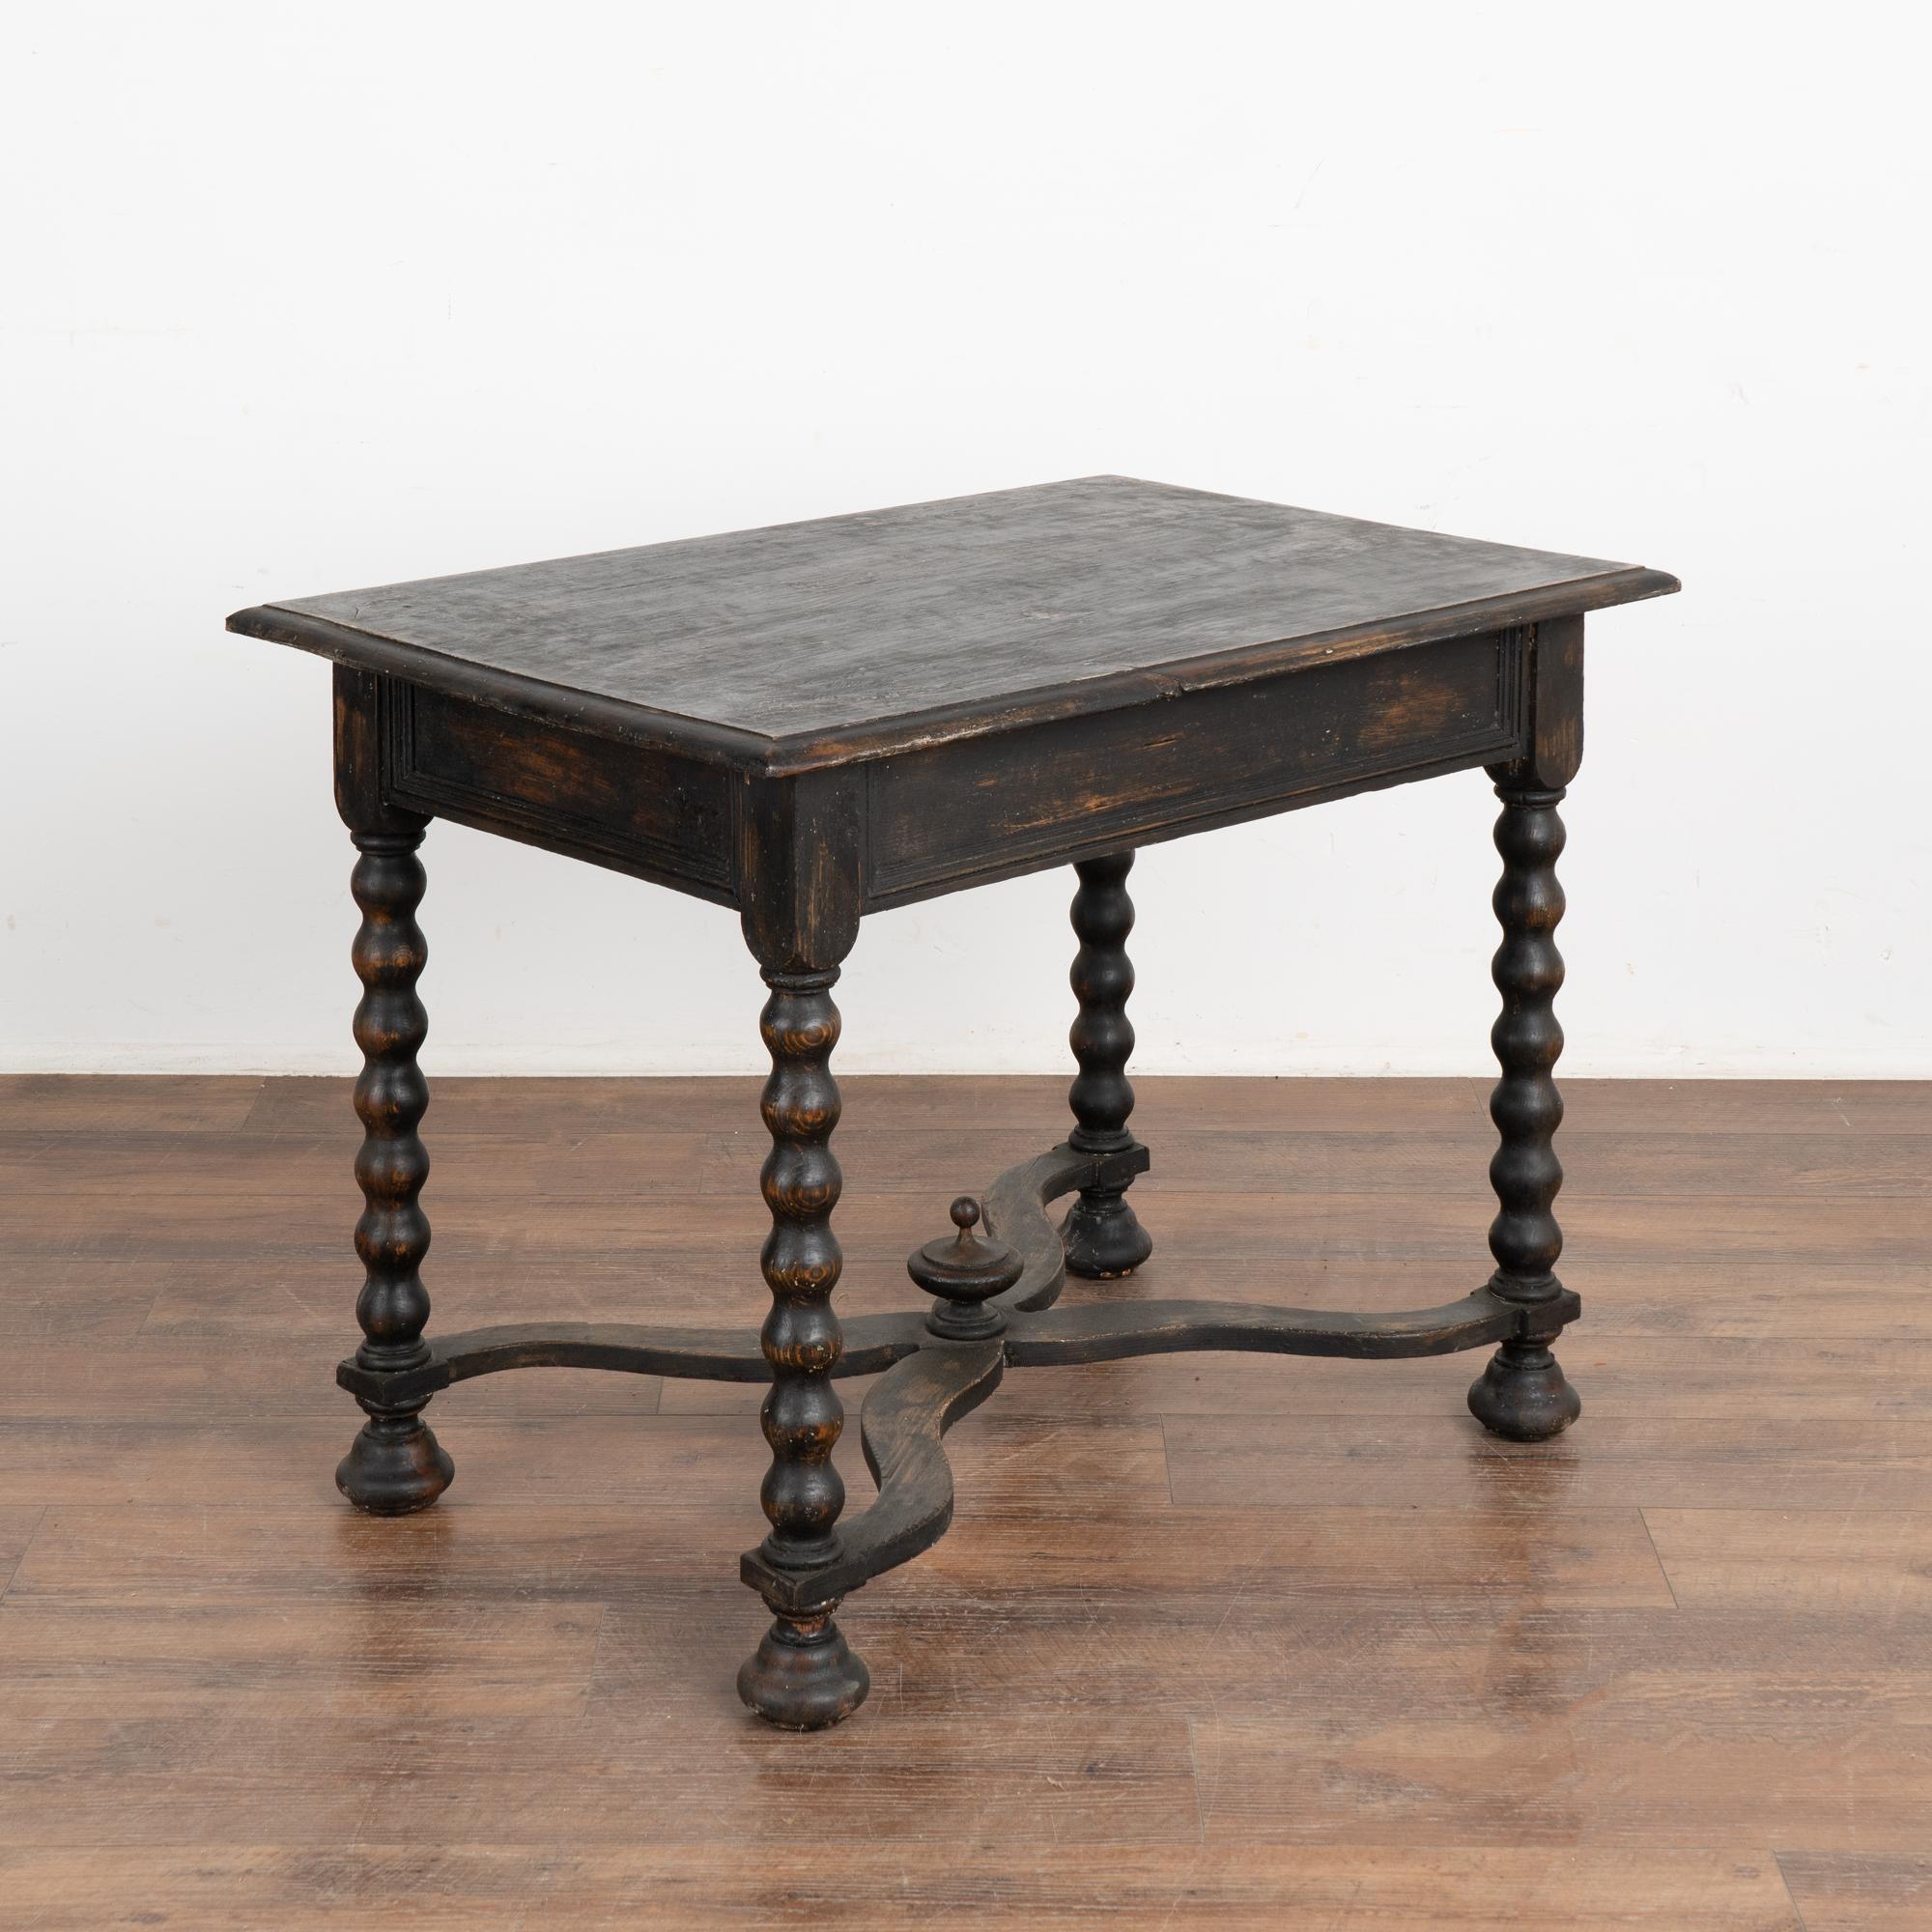 Black Painted Side Table With Turned Legs, Sweden circa 1840 3